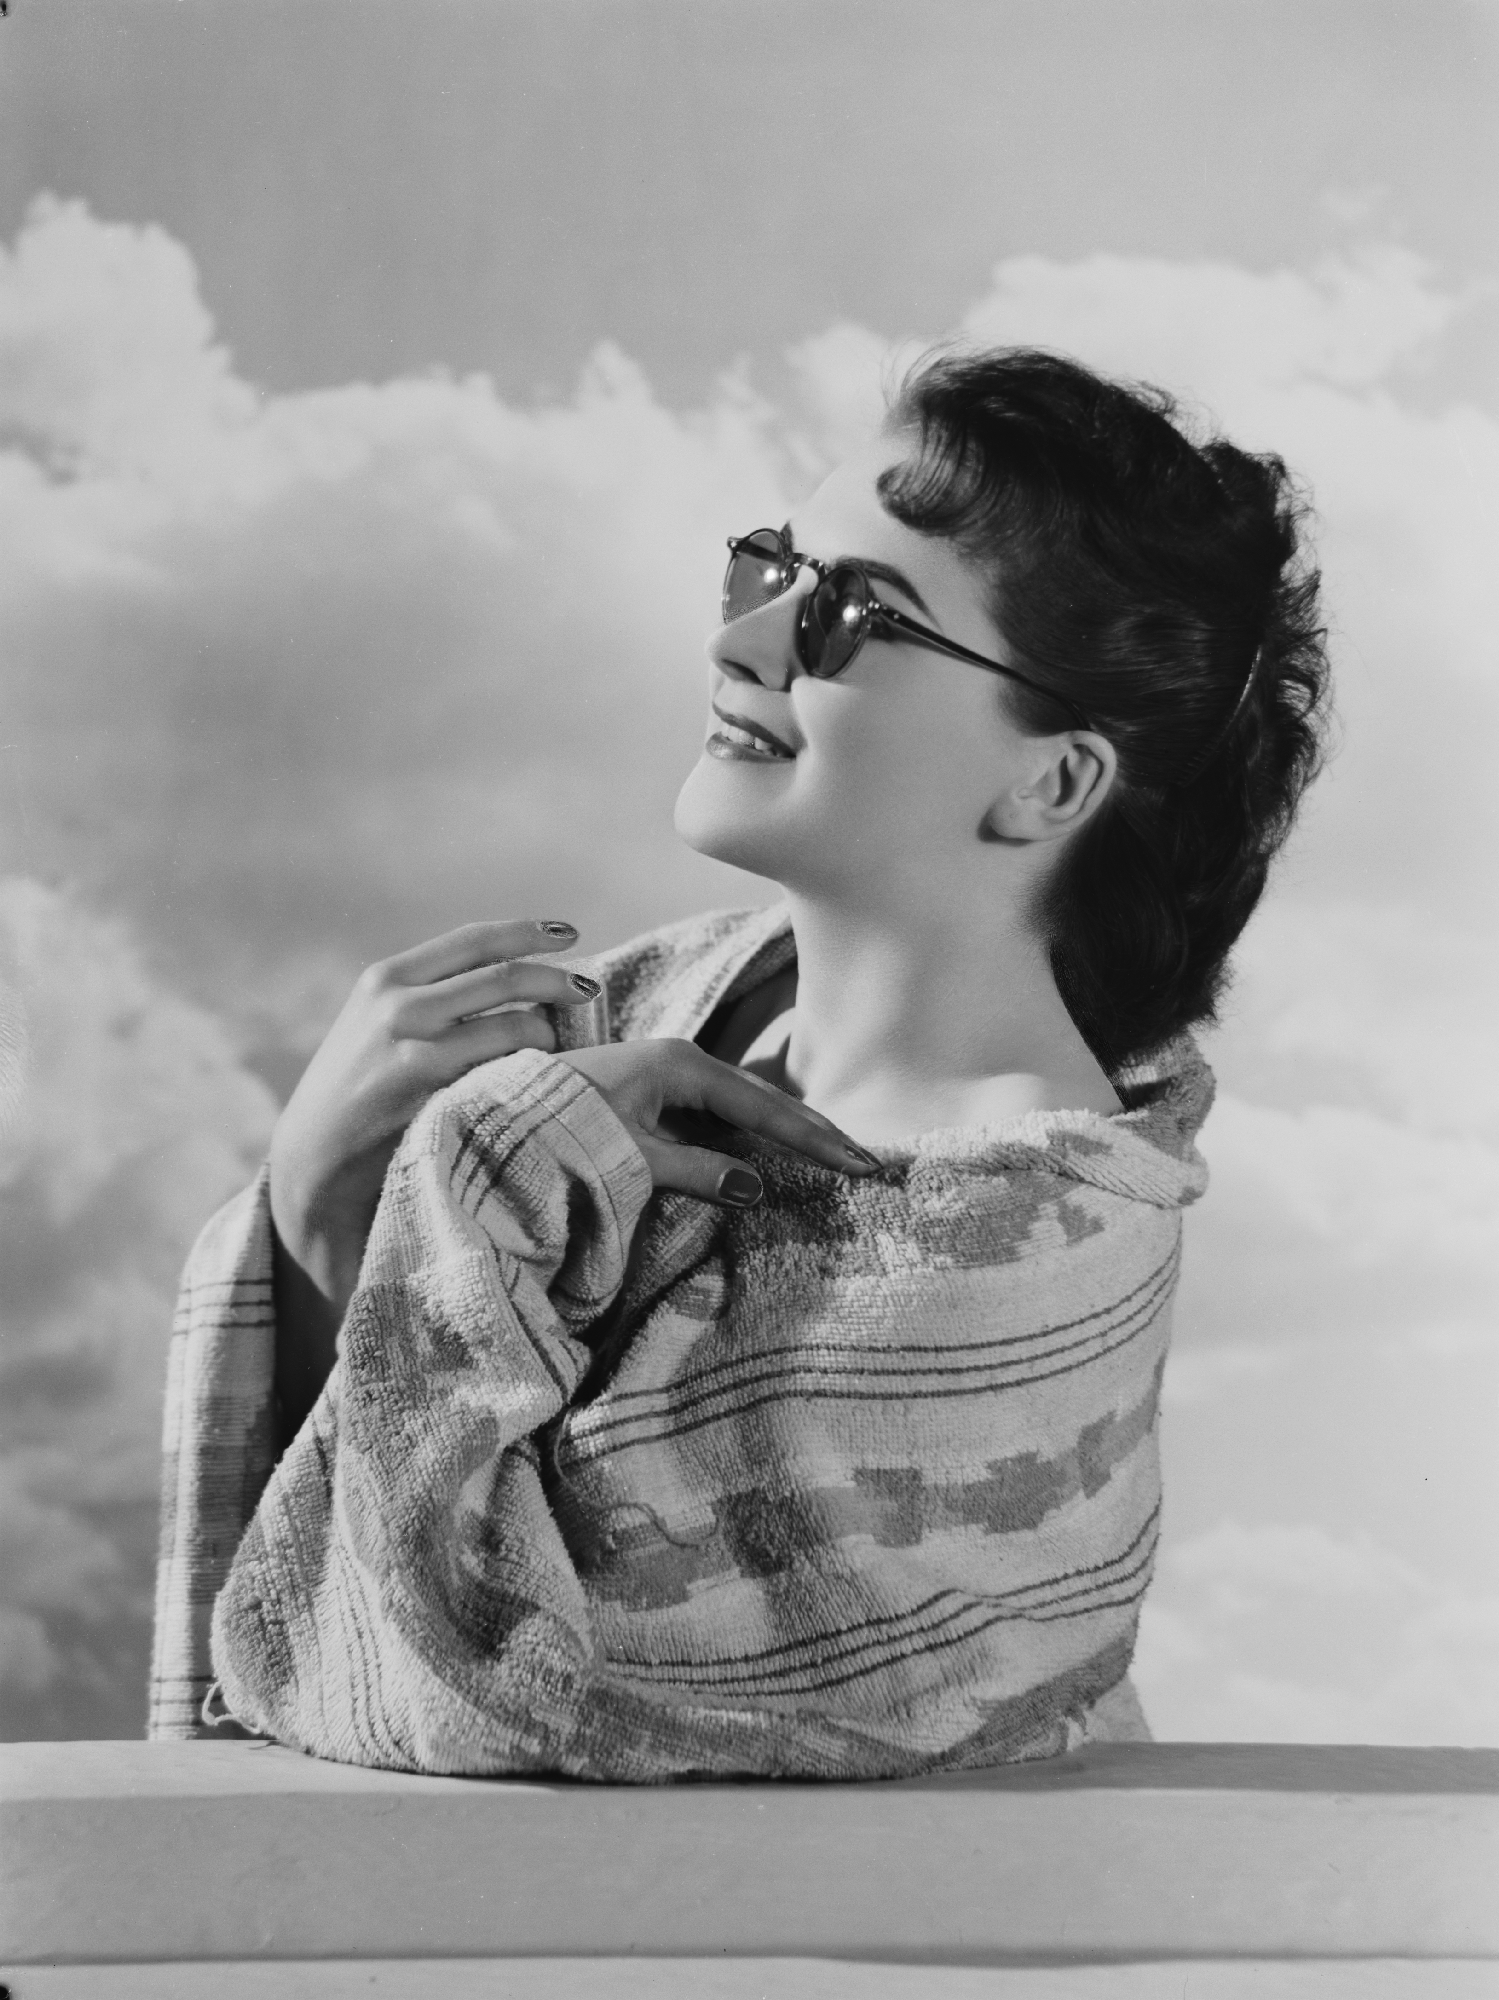 A photograph of a young woman wrapped in a towel wearing a pair of sunglasses